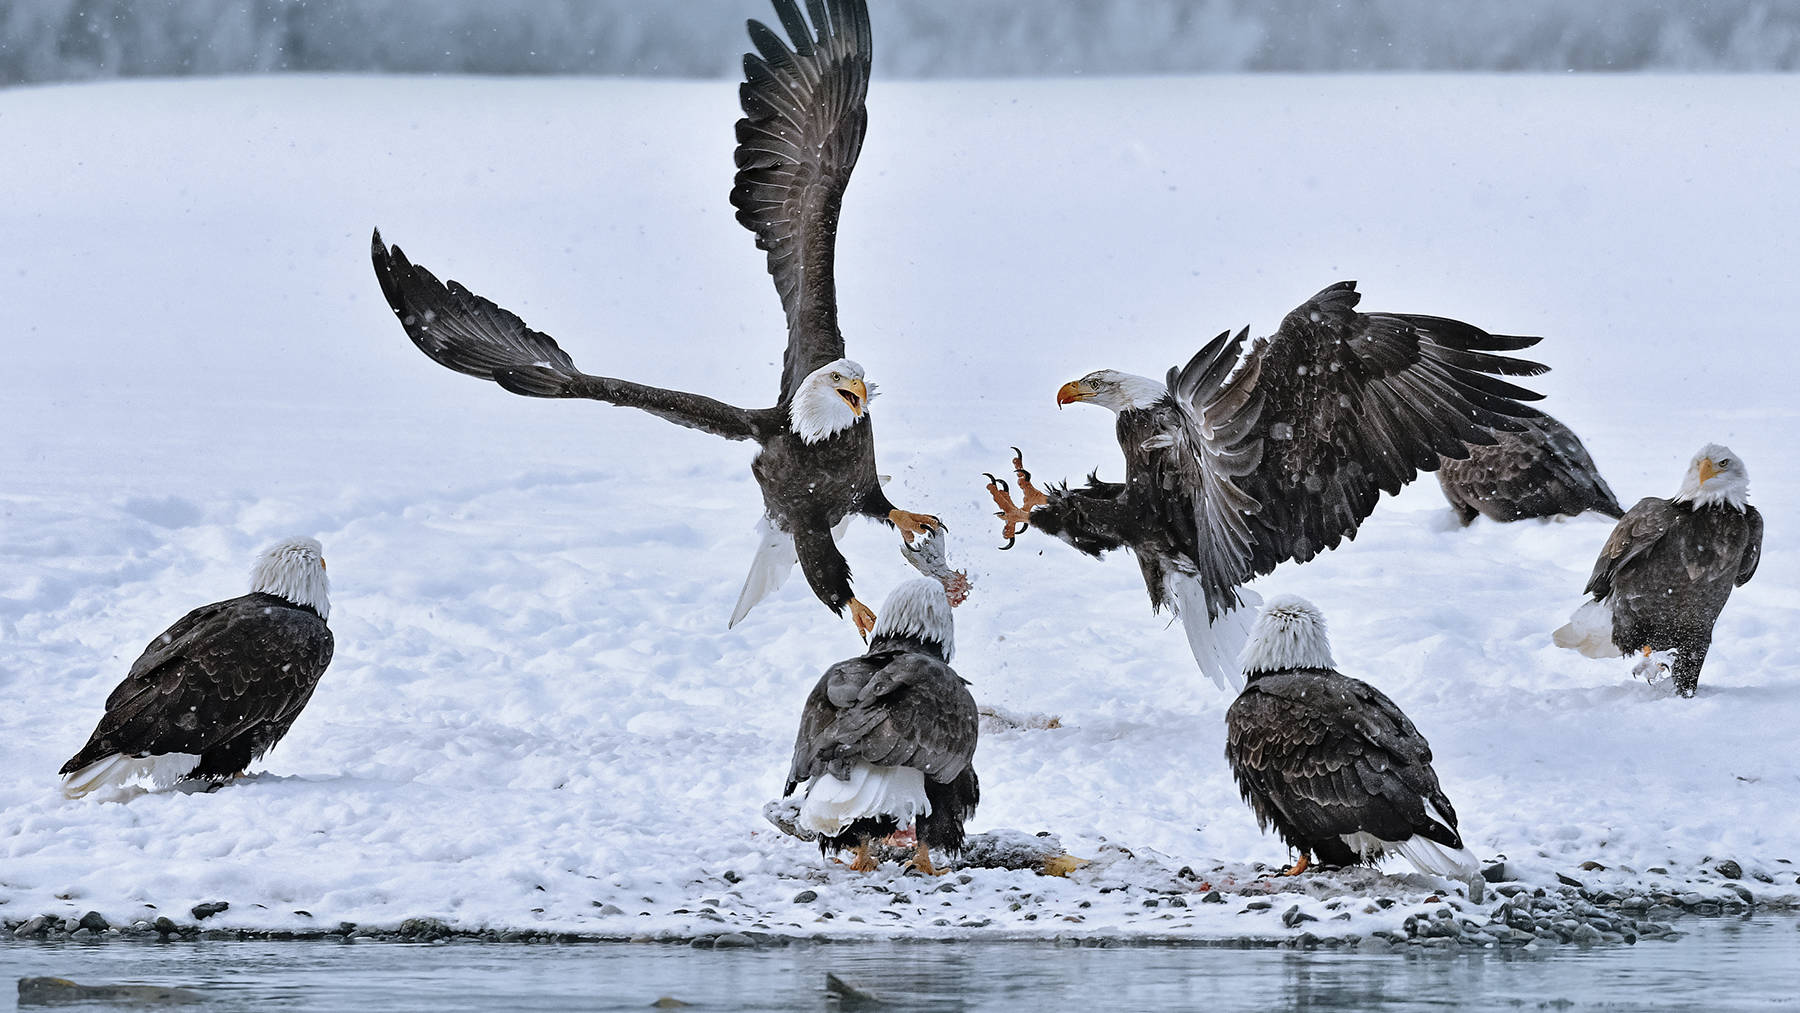 Eagles fight over fish in the Chilkat Valley. (Courtesy Photo | Brian Rivera Uncapher)